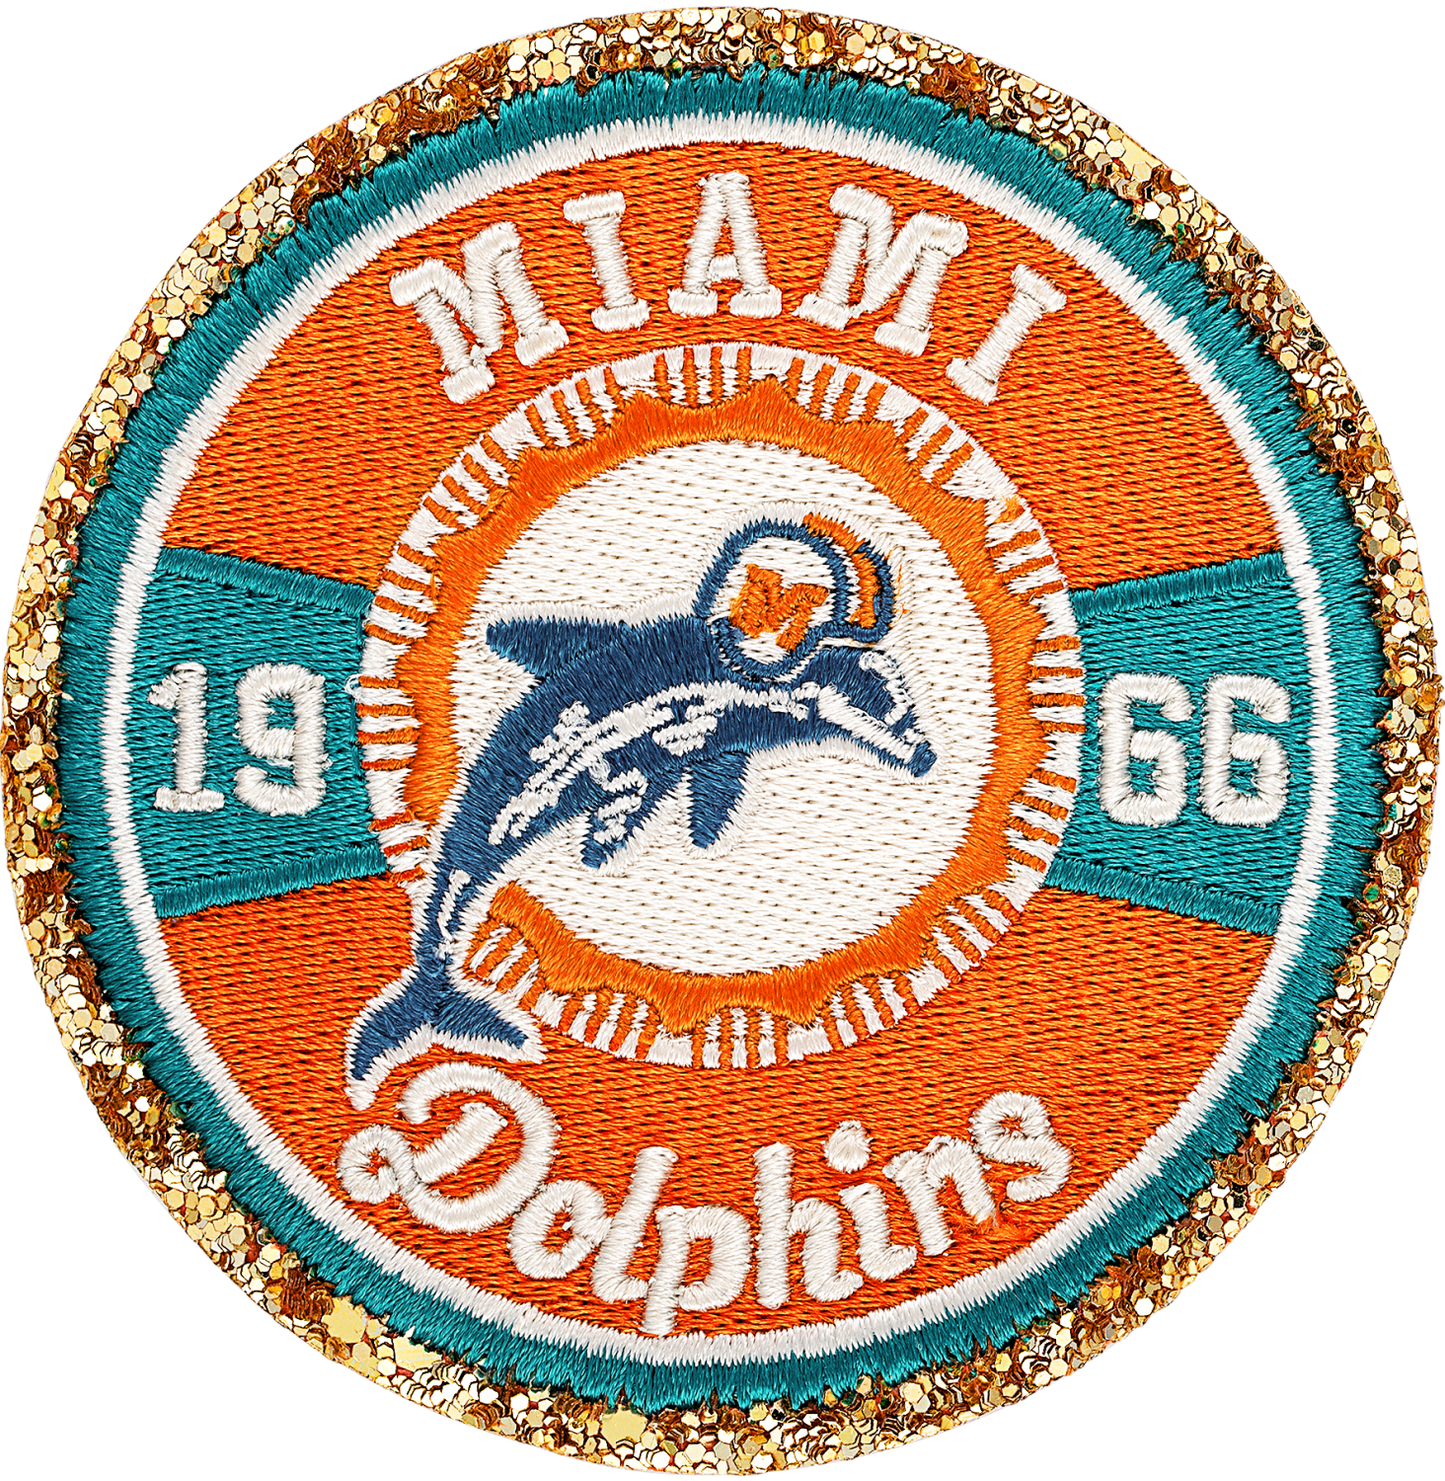 Miami Dolphins Patch